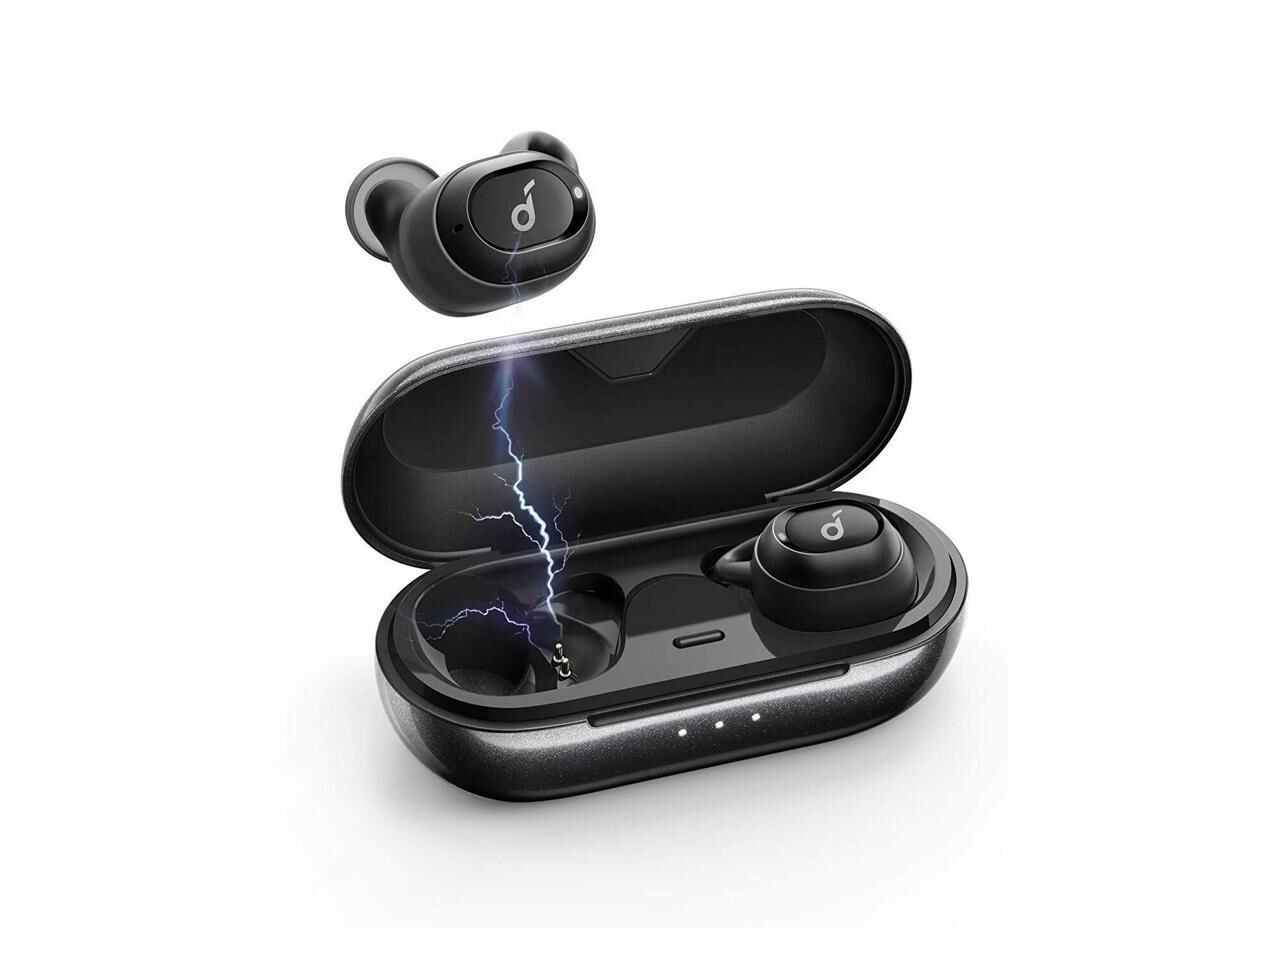 Anker Liberty Neo,Truly-Wireless Earbuds, Wireless Headphones12-Hour Playtime